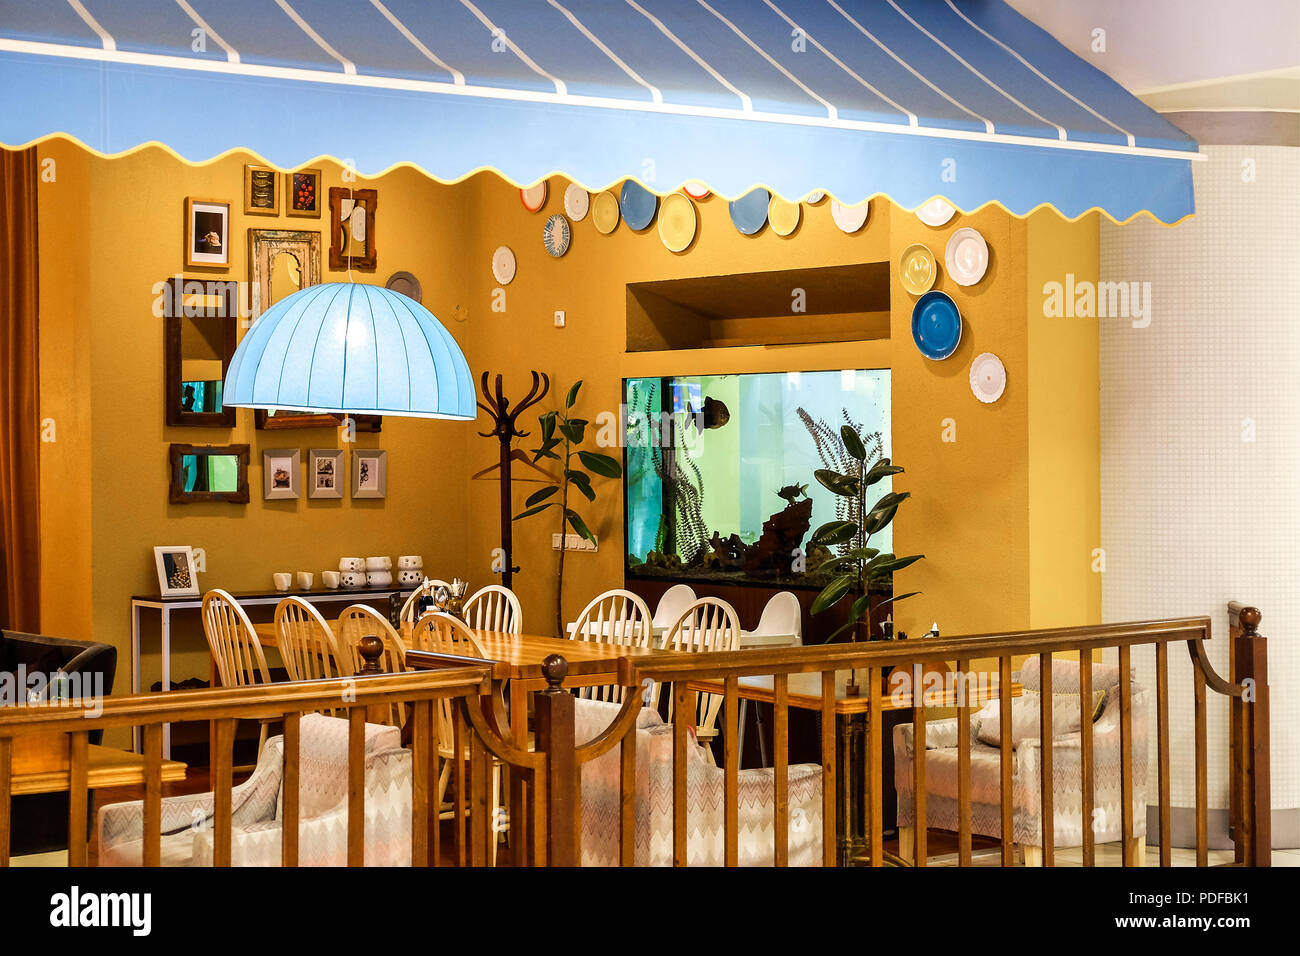 It is an Italian restaurant with a traditional interior. Blue canopy of awnings for shade. Lamp with blue lampshade above the table. Stock Photo